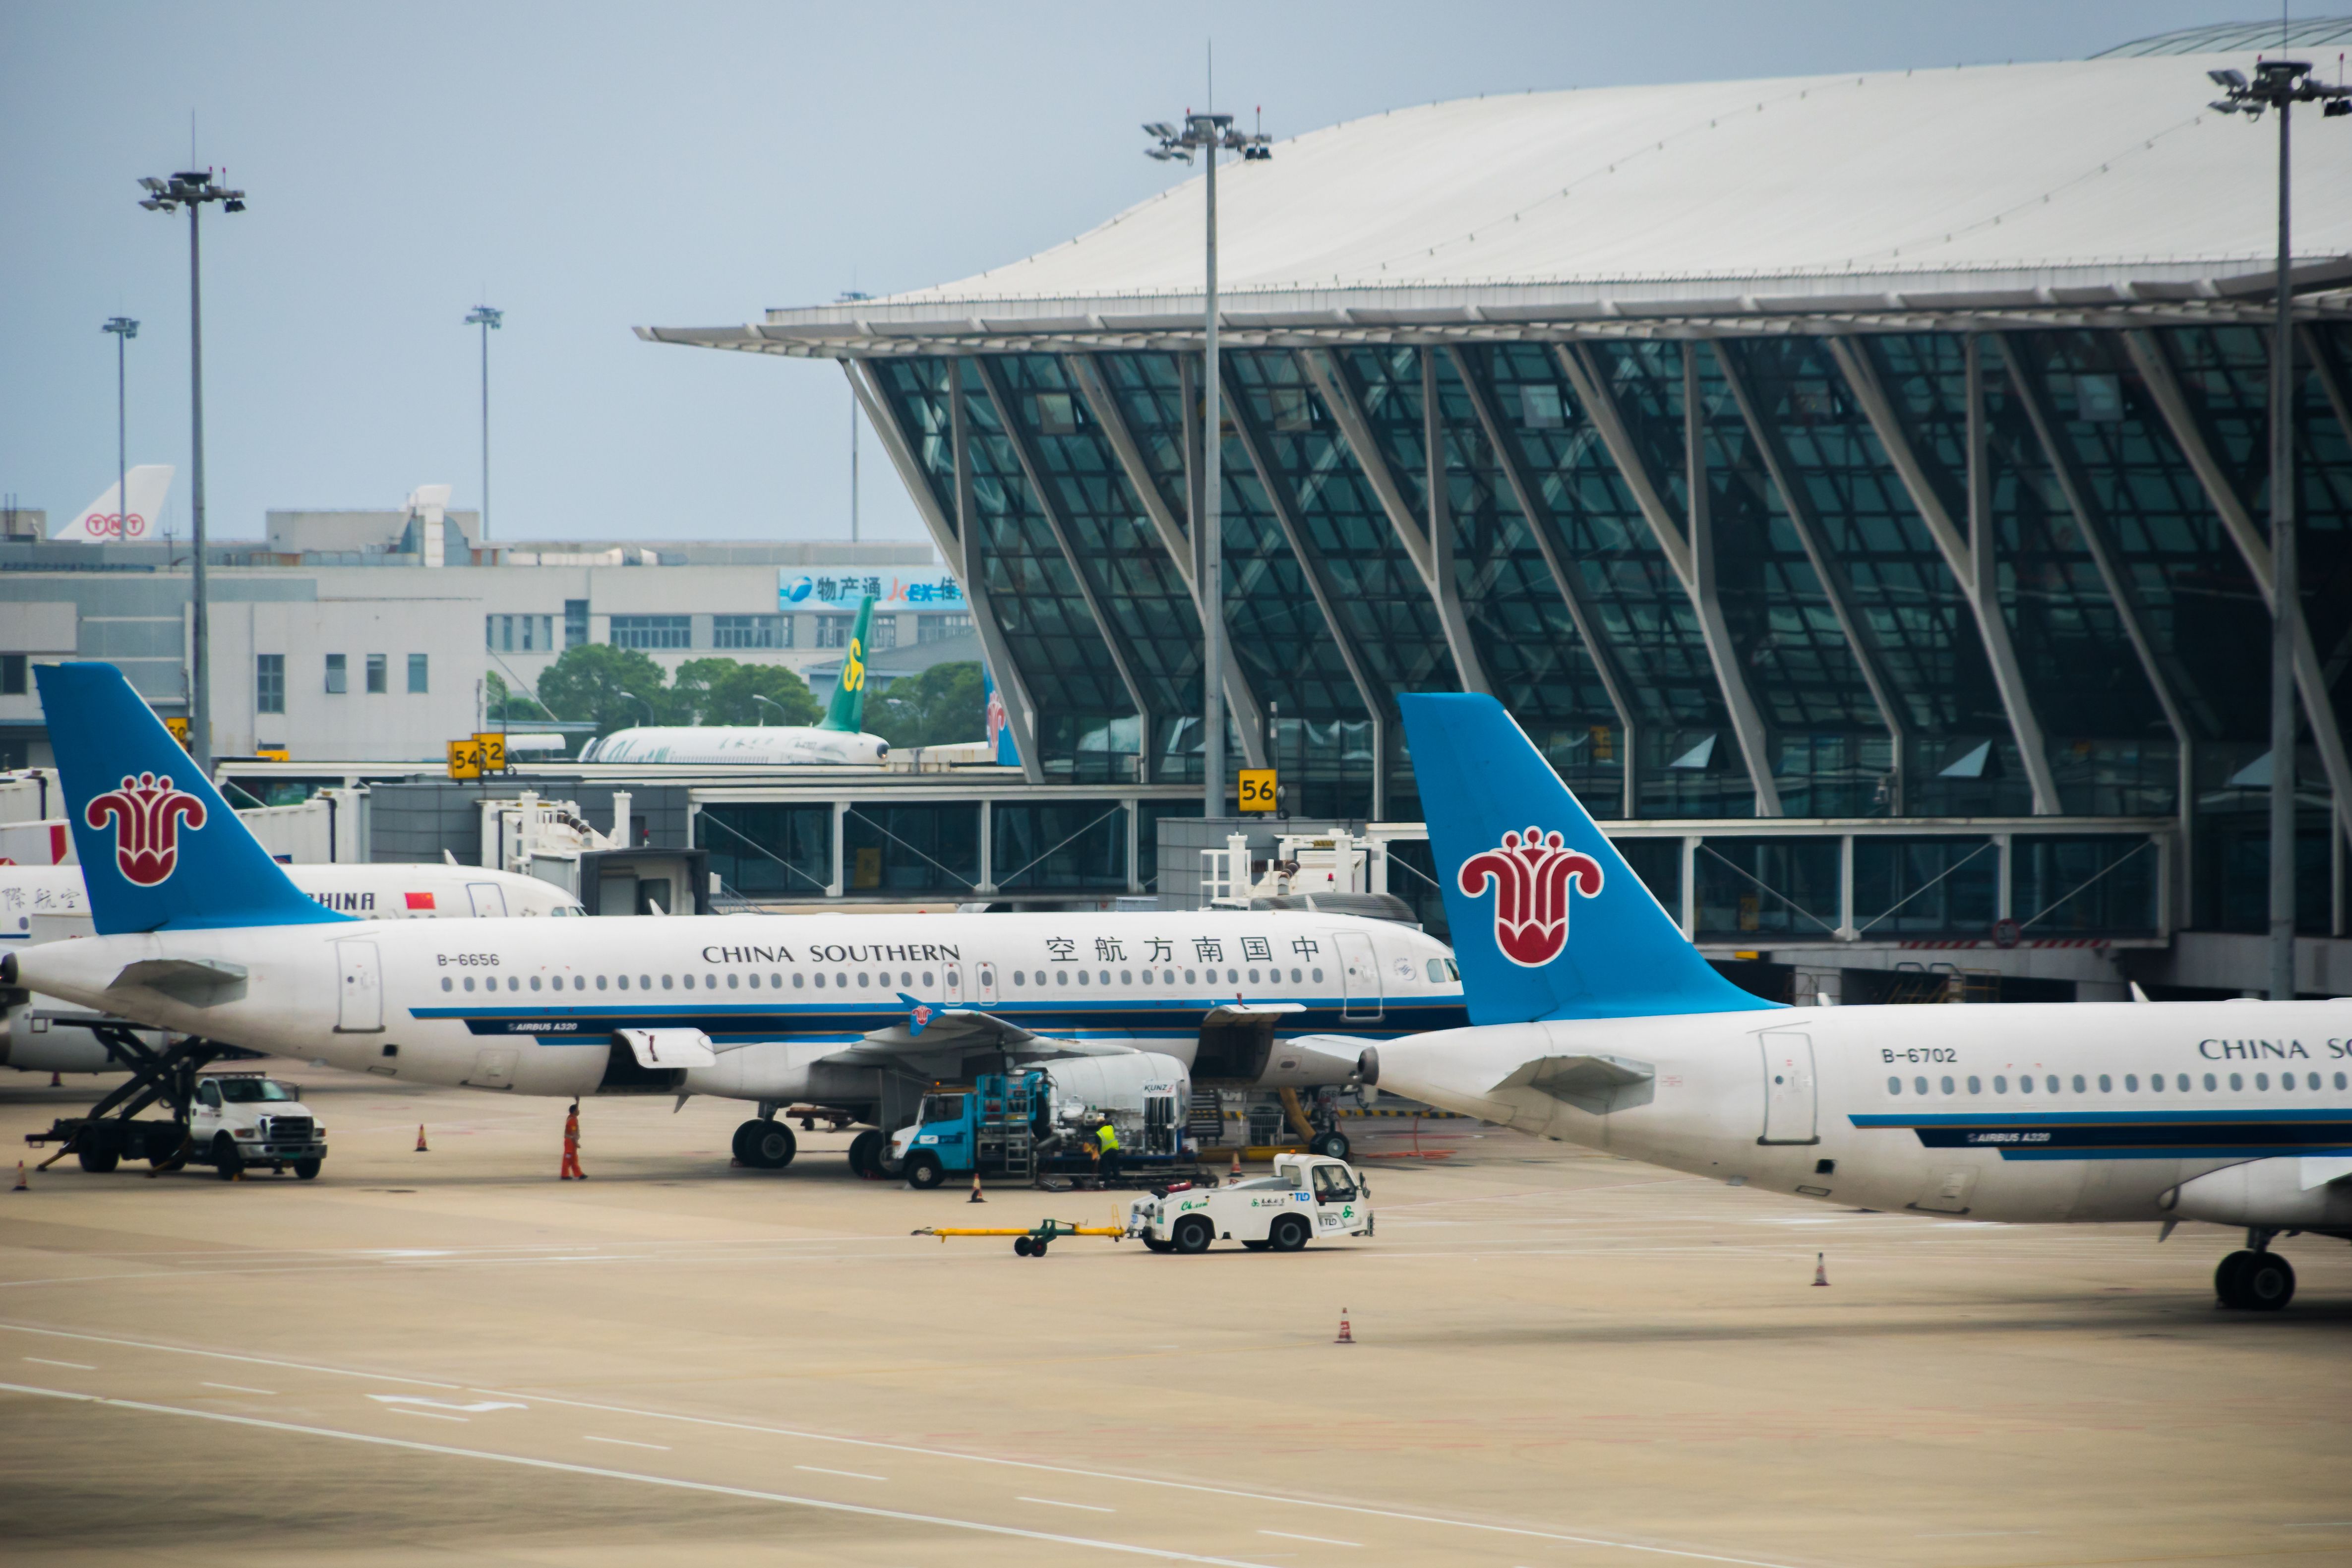 Multiple China Southern Airlines aircraft parked at Shanghai Pudong airport.